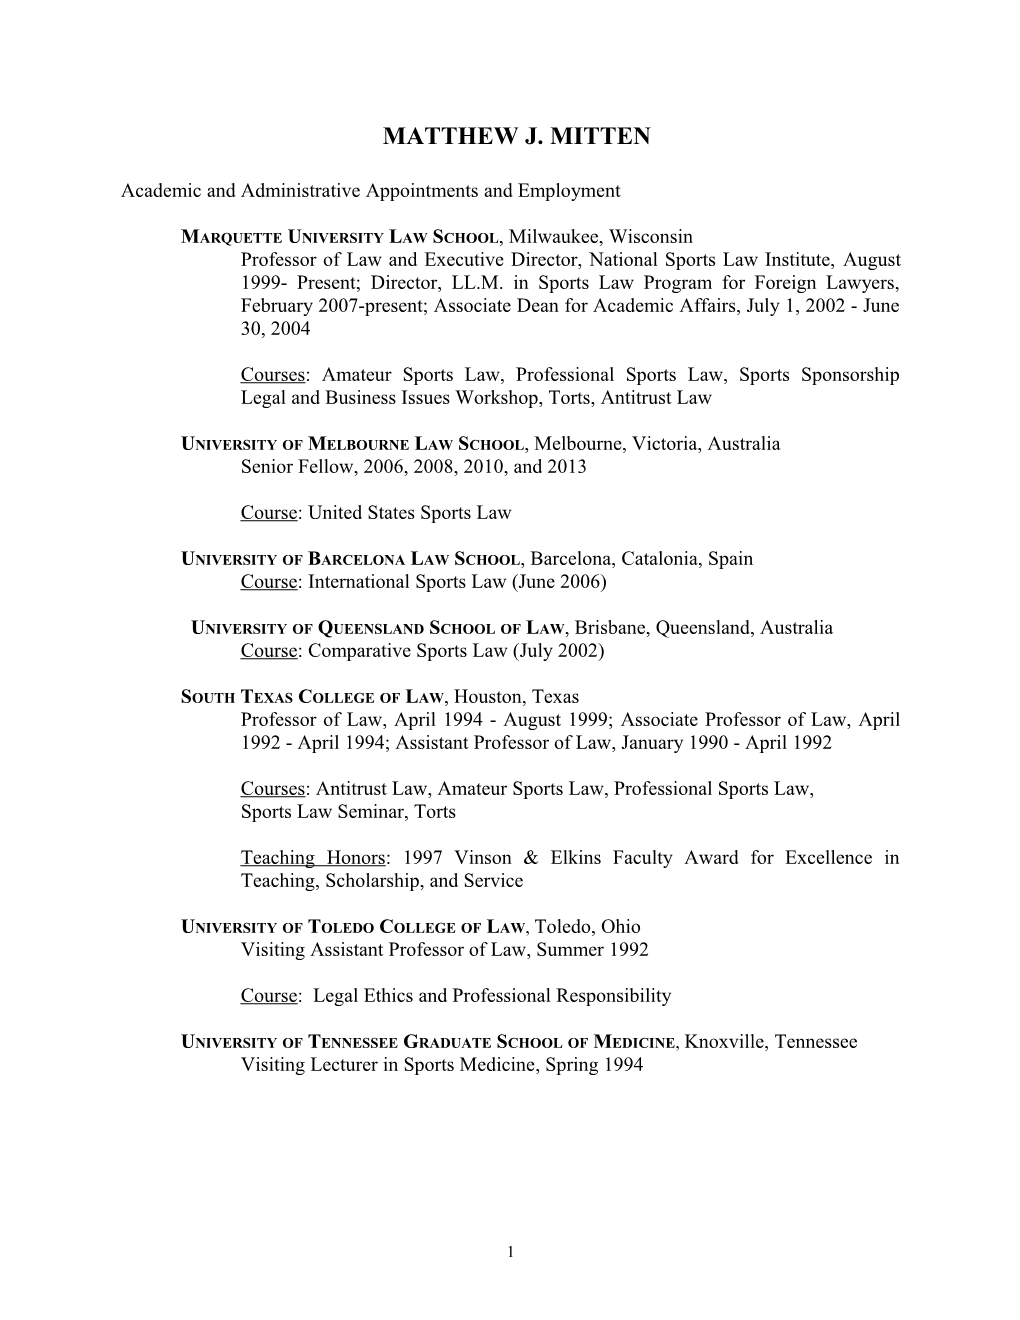 Academic and Administrative Appointments and Employment